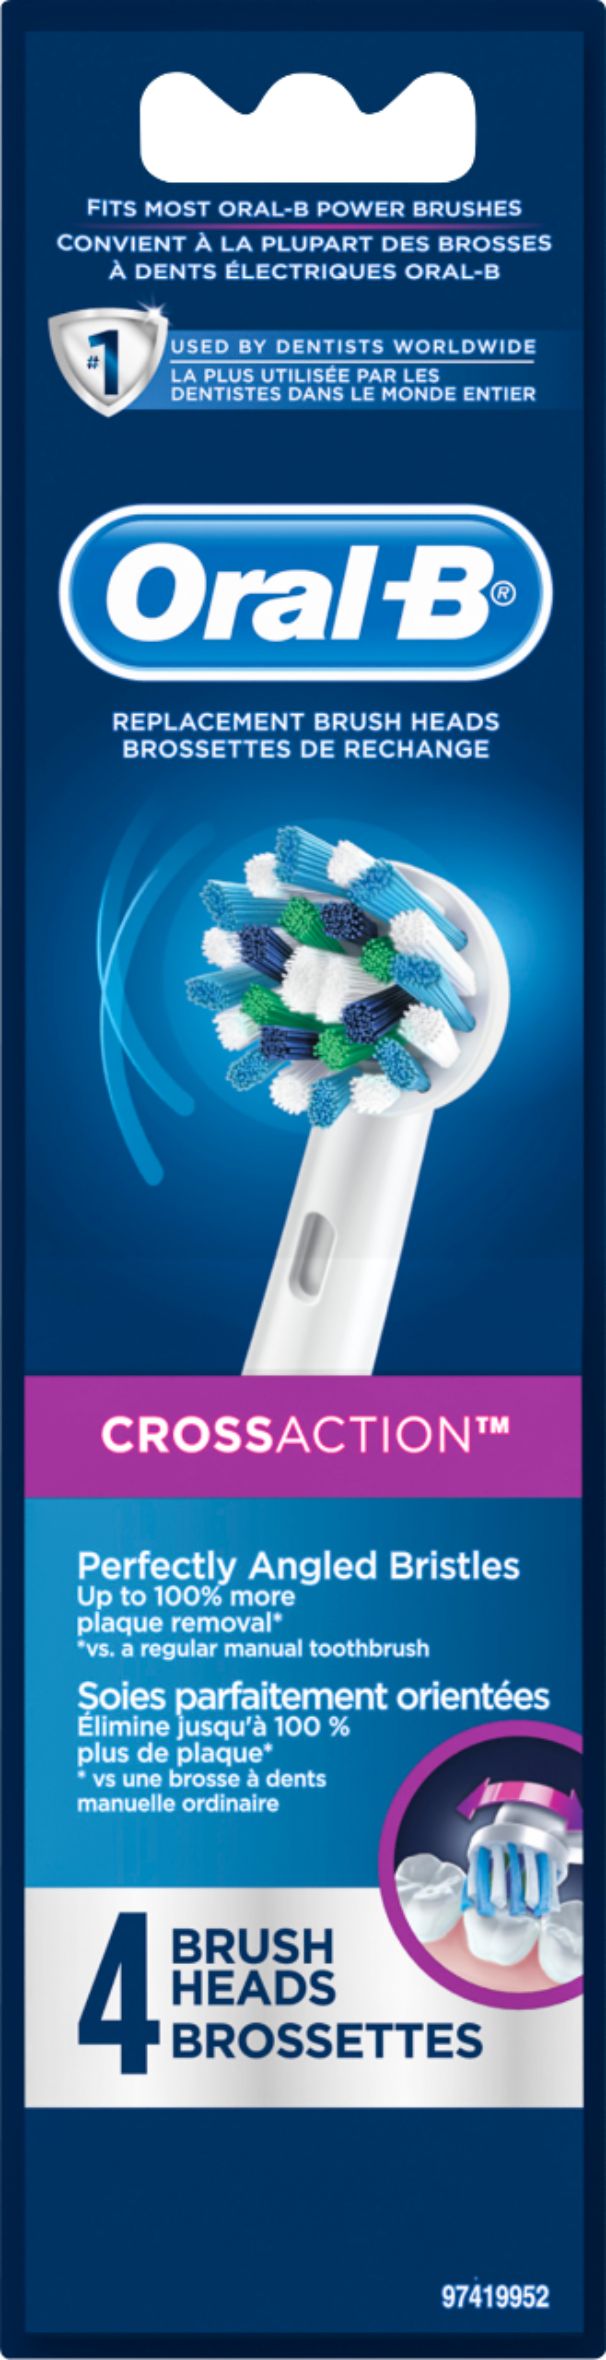 Oven Gedragen Sitcom Best Buy: Oral-B CrossAction Replacement Brush Heads (4-Pack) White EB50-4